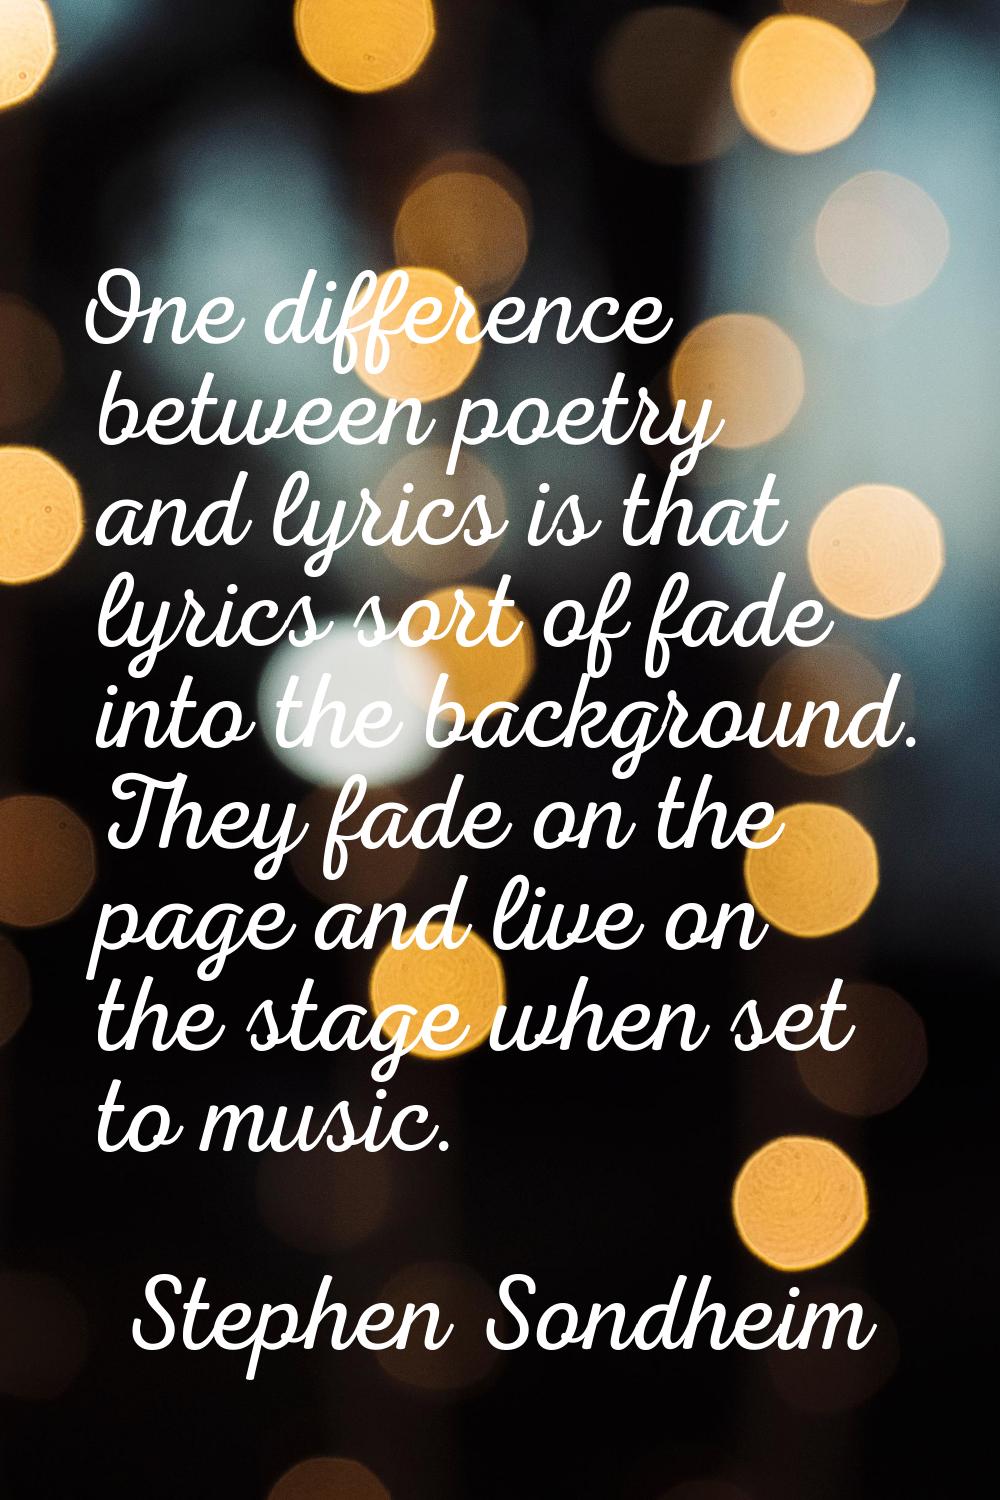 One difference between poetry and lyrics is that lyrics sort of fade into the background. They fade